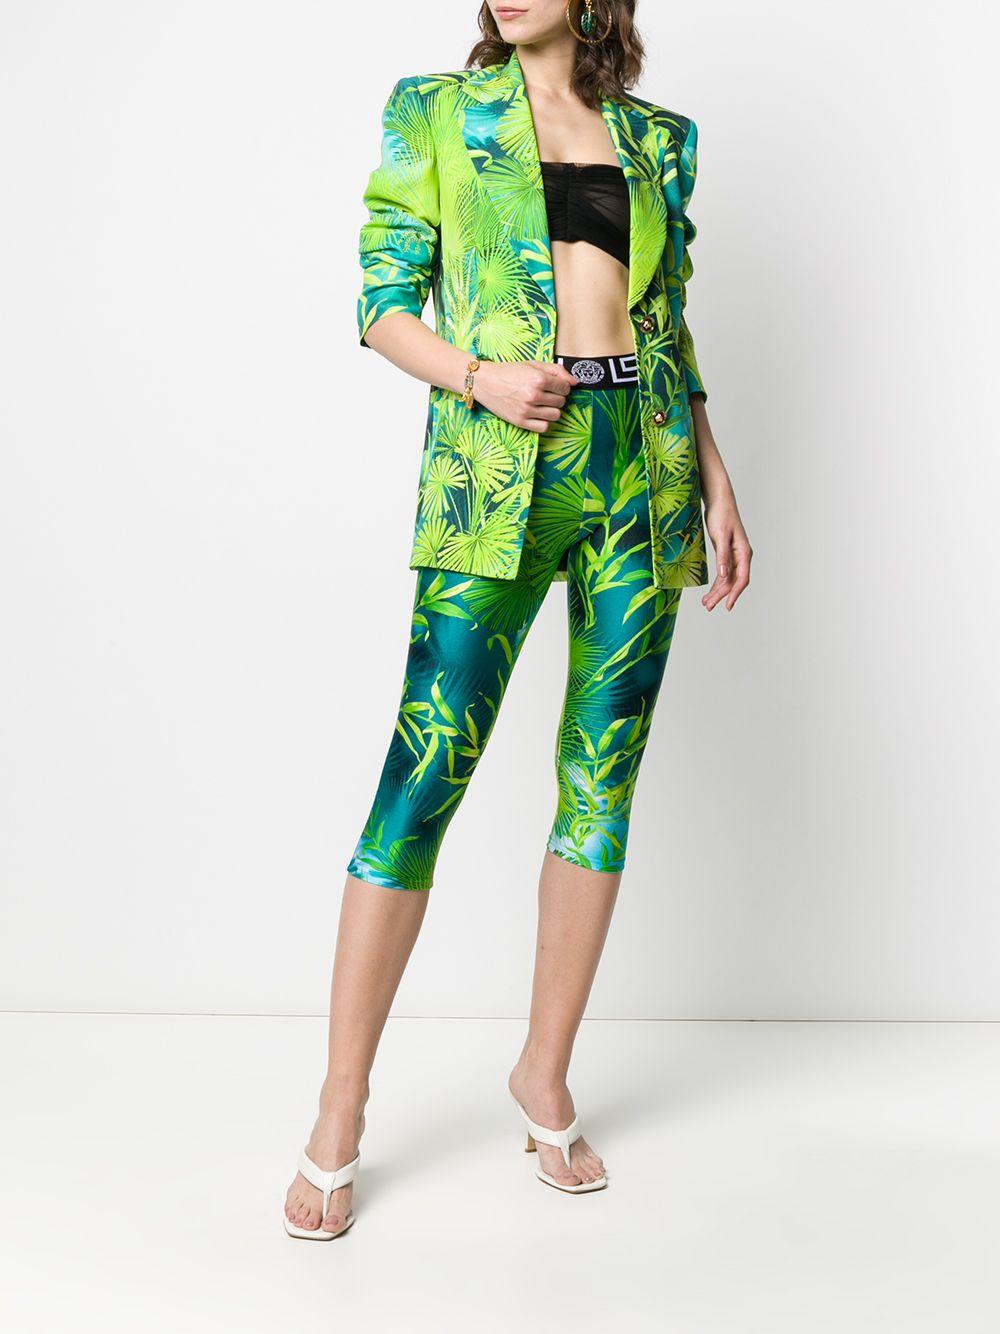 Versace Spring 2020 Runway Verde Jungle Print Single Breasted Blazer

If you can't go to the tropics, have the tropics come to you. This green and blue single-breasted blazer from Versace is decorated with a Verde Jungle print that will brighten up